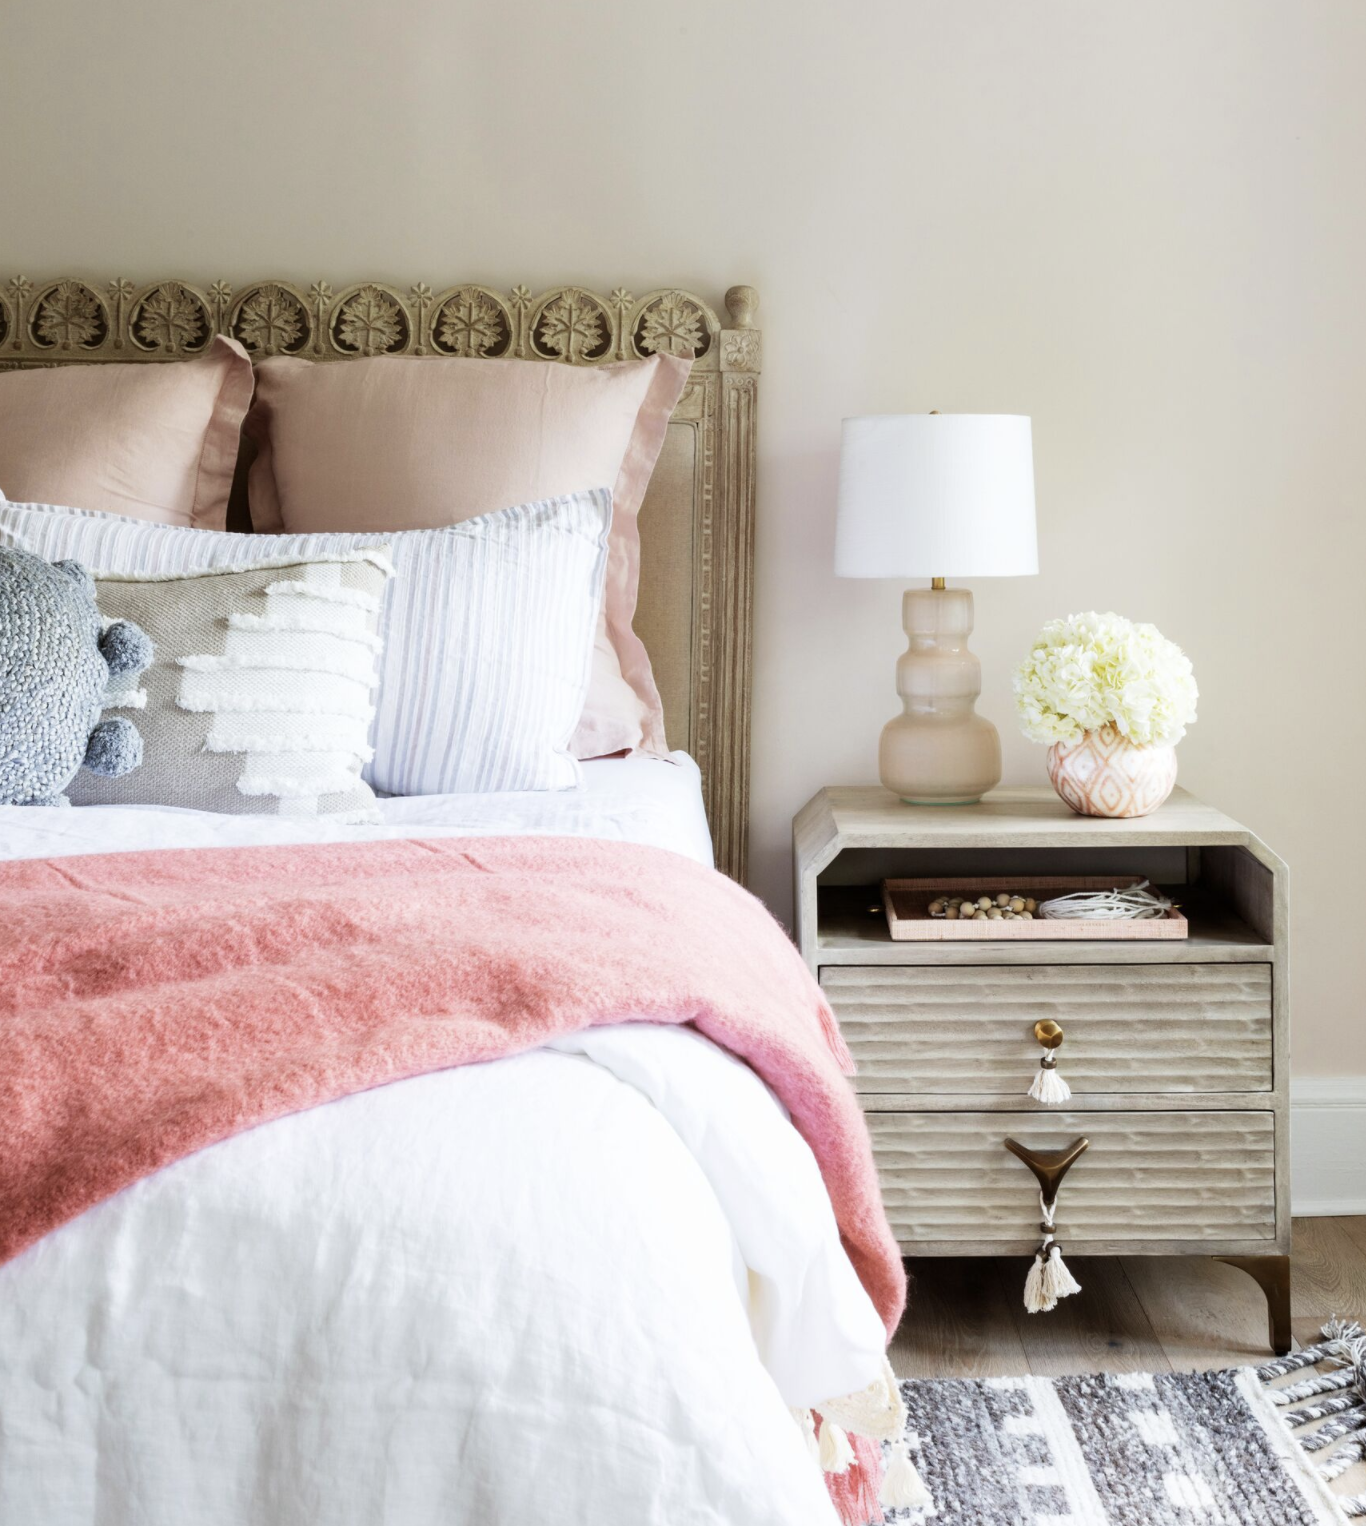 14 Best Pink and Gray Bedrooms - Pink and Gray Bedroom Decor and ...